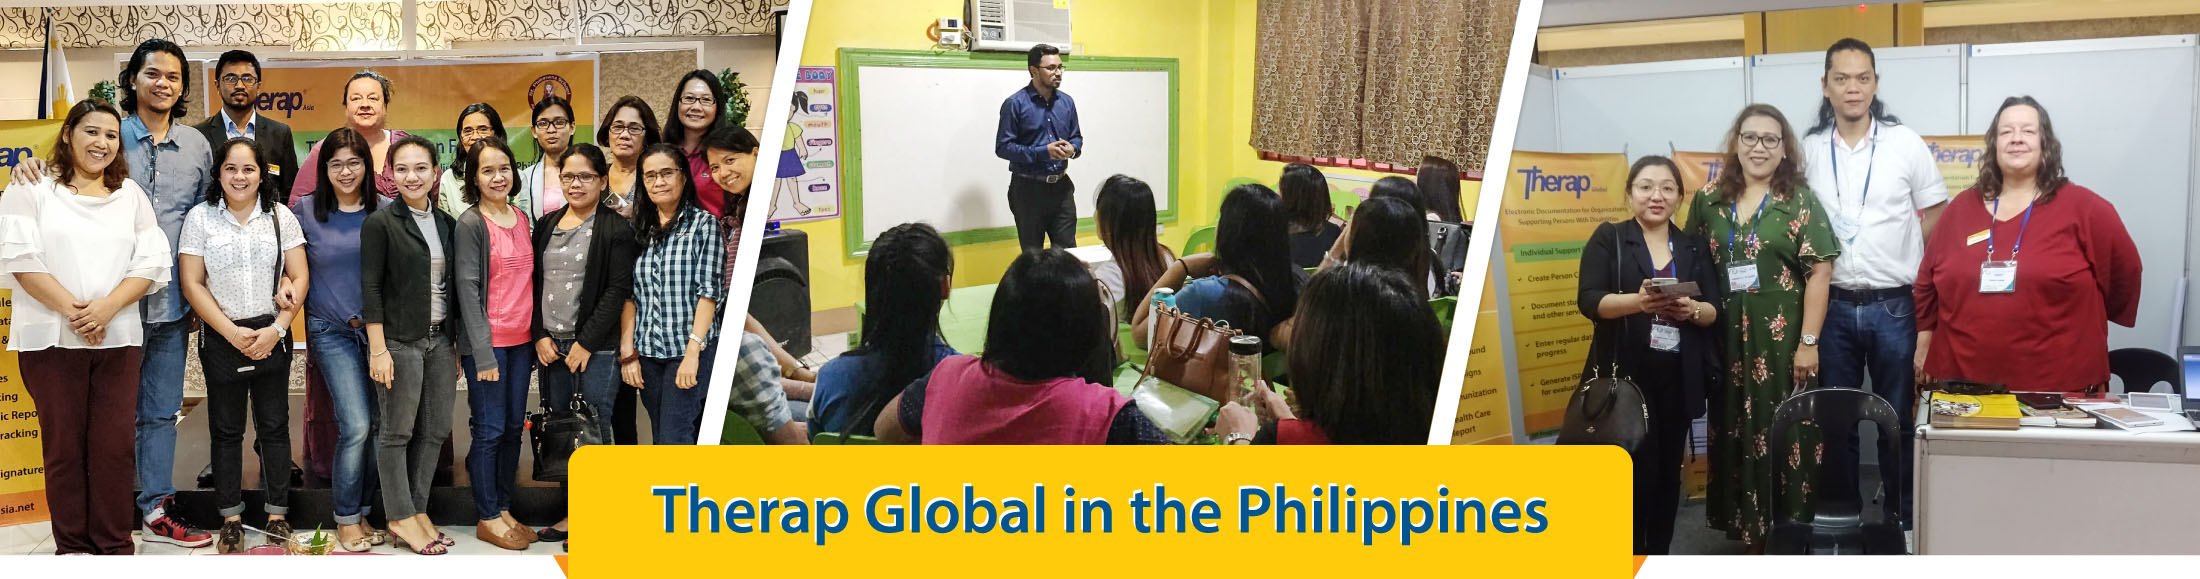 Therap Global in the Philippines